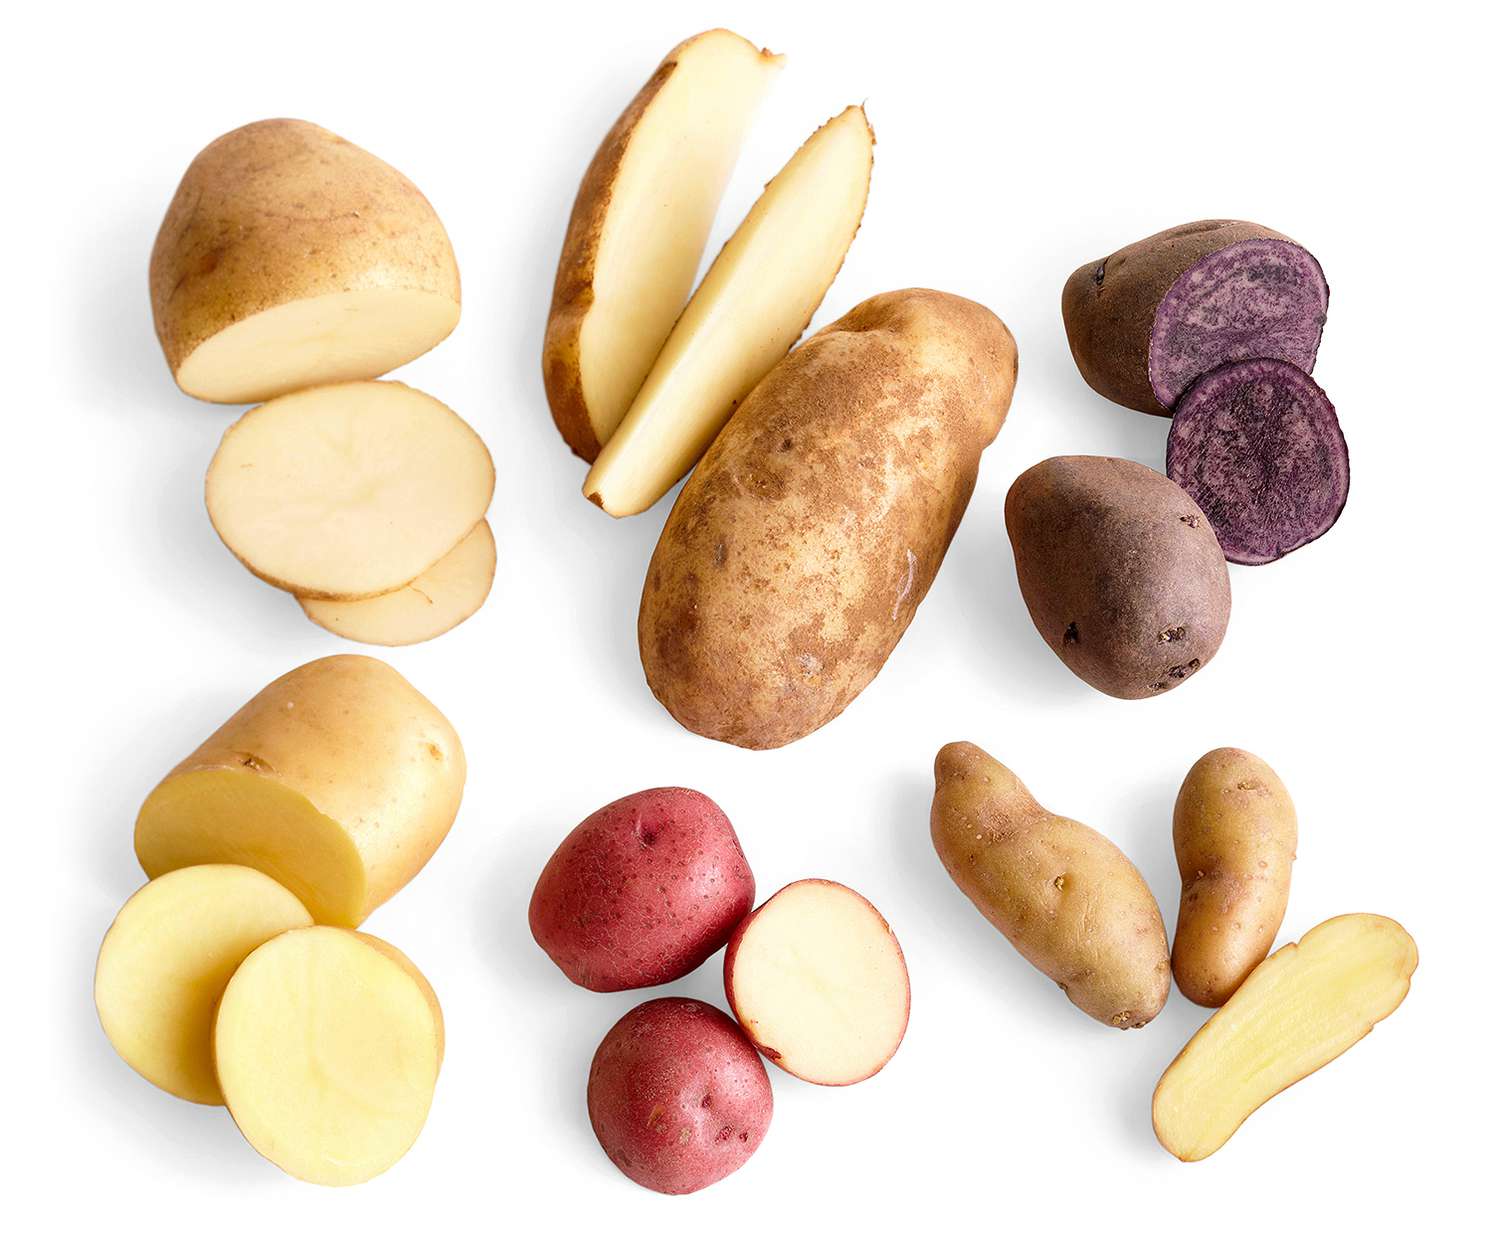 white russet gold red potatoes sliced cut